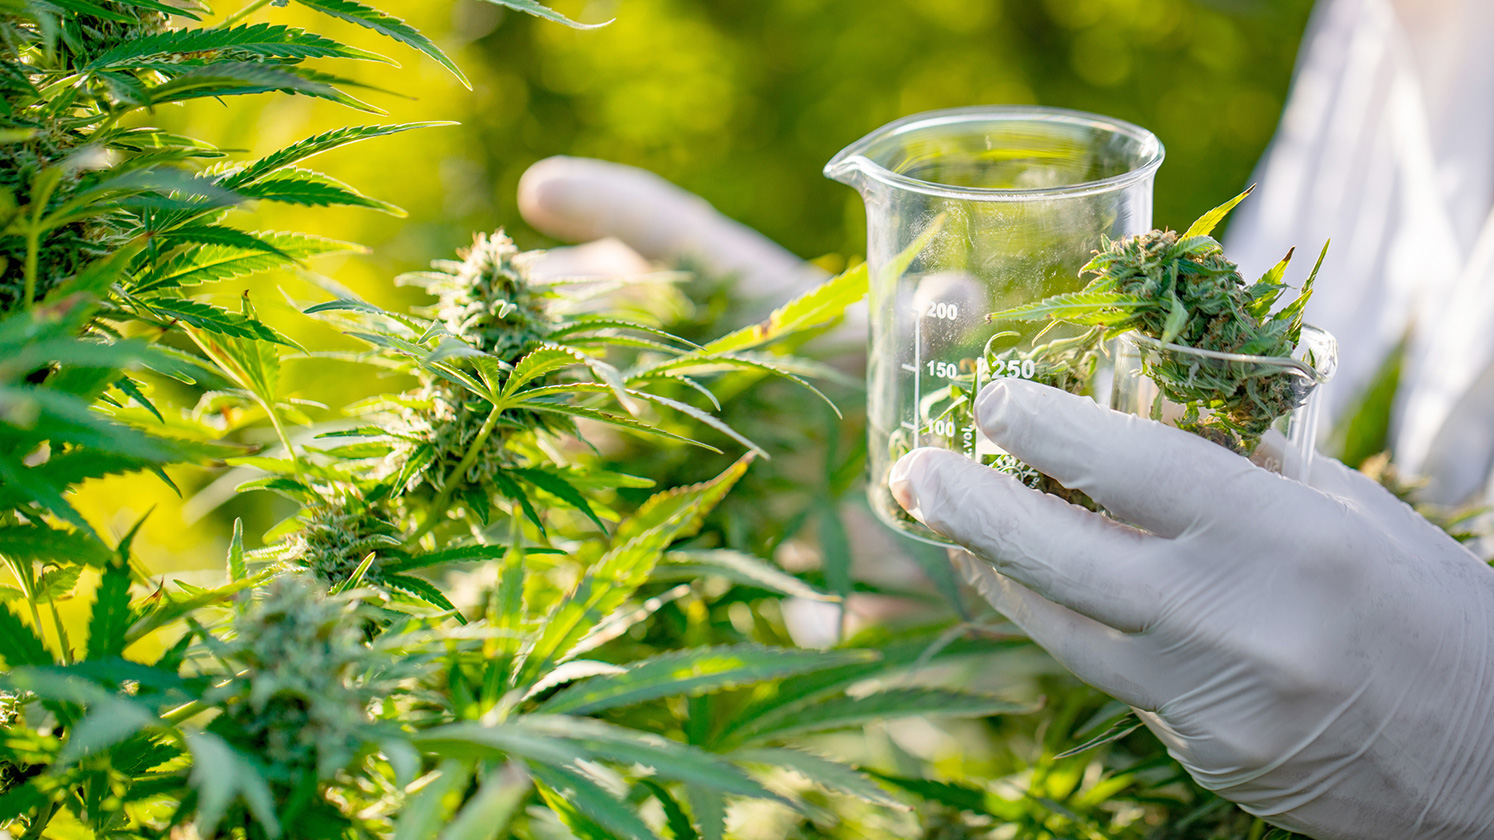 Cannabis Cultivation Market Is Estimated To Witness High Growth Owing To Legalization Of Cannabis For Medicinal Purposes And Market Consolidation